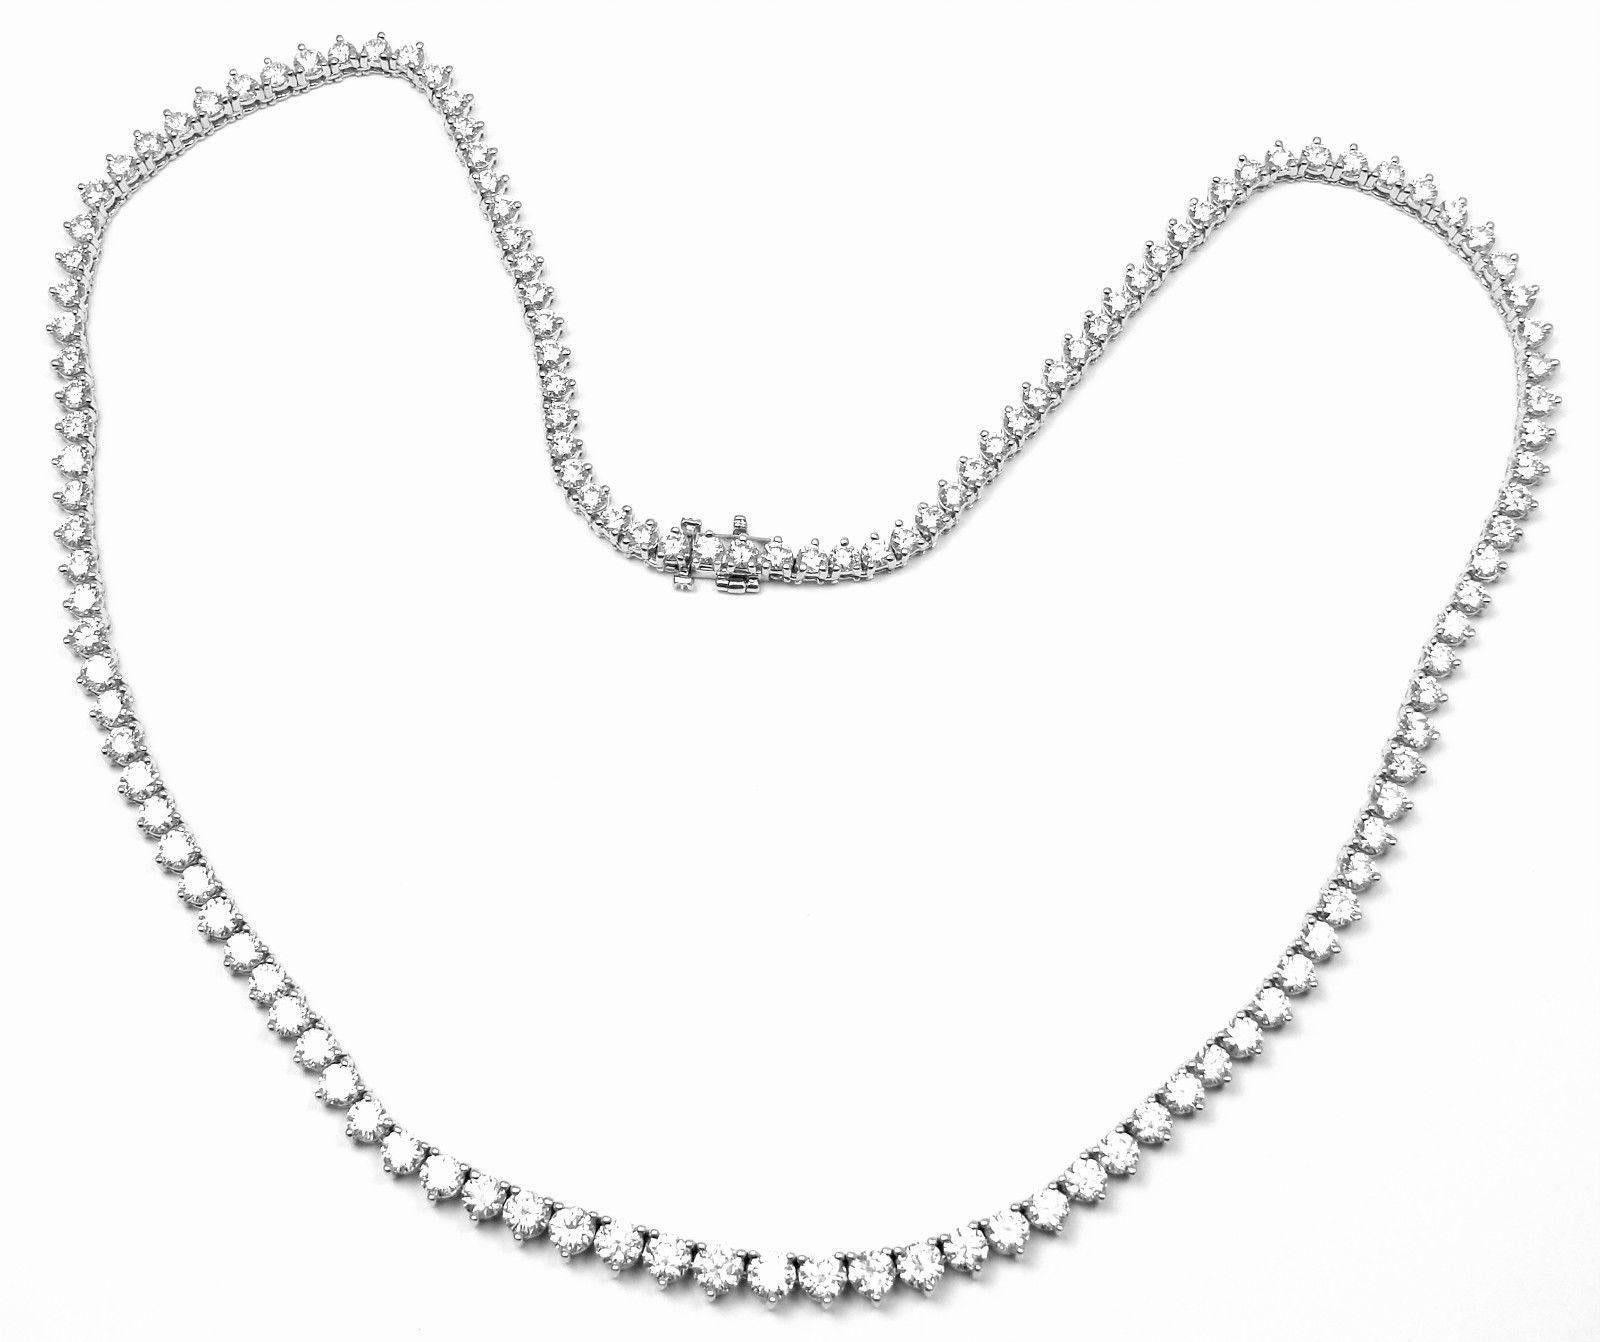 Platinum 13.1ct Diamond Tennis Line Necklace by Cartier.
With 131 round brilliant cut diamonds VVS1 clarity, E color total weight approx. 13.1ct
This necklace comes with an original Cartier box and a Cartier service paper.
The Estimated Retail Price